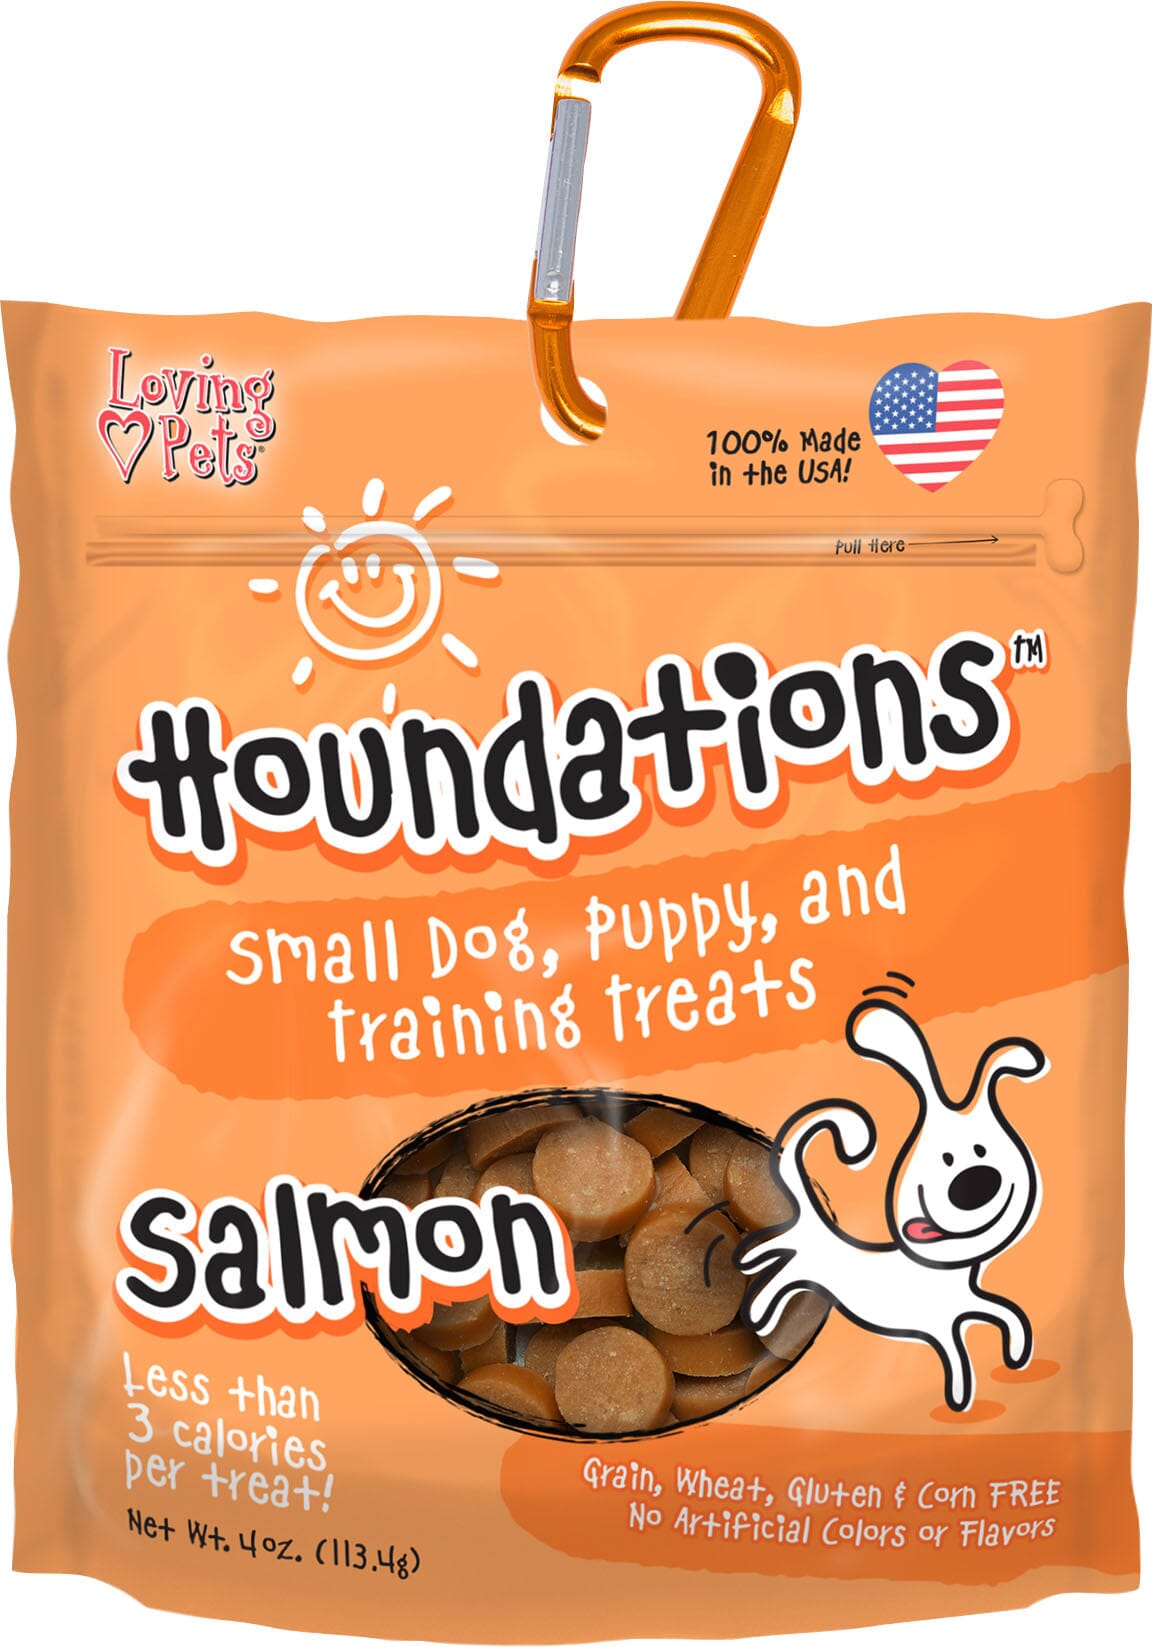 Loving Pets Houndations USA Training Treats with Carabiner Soft and Chewy Dog Treats - Salmon - 4 Oz  